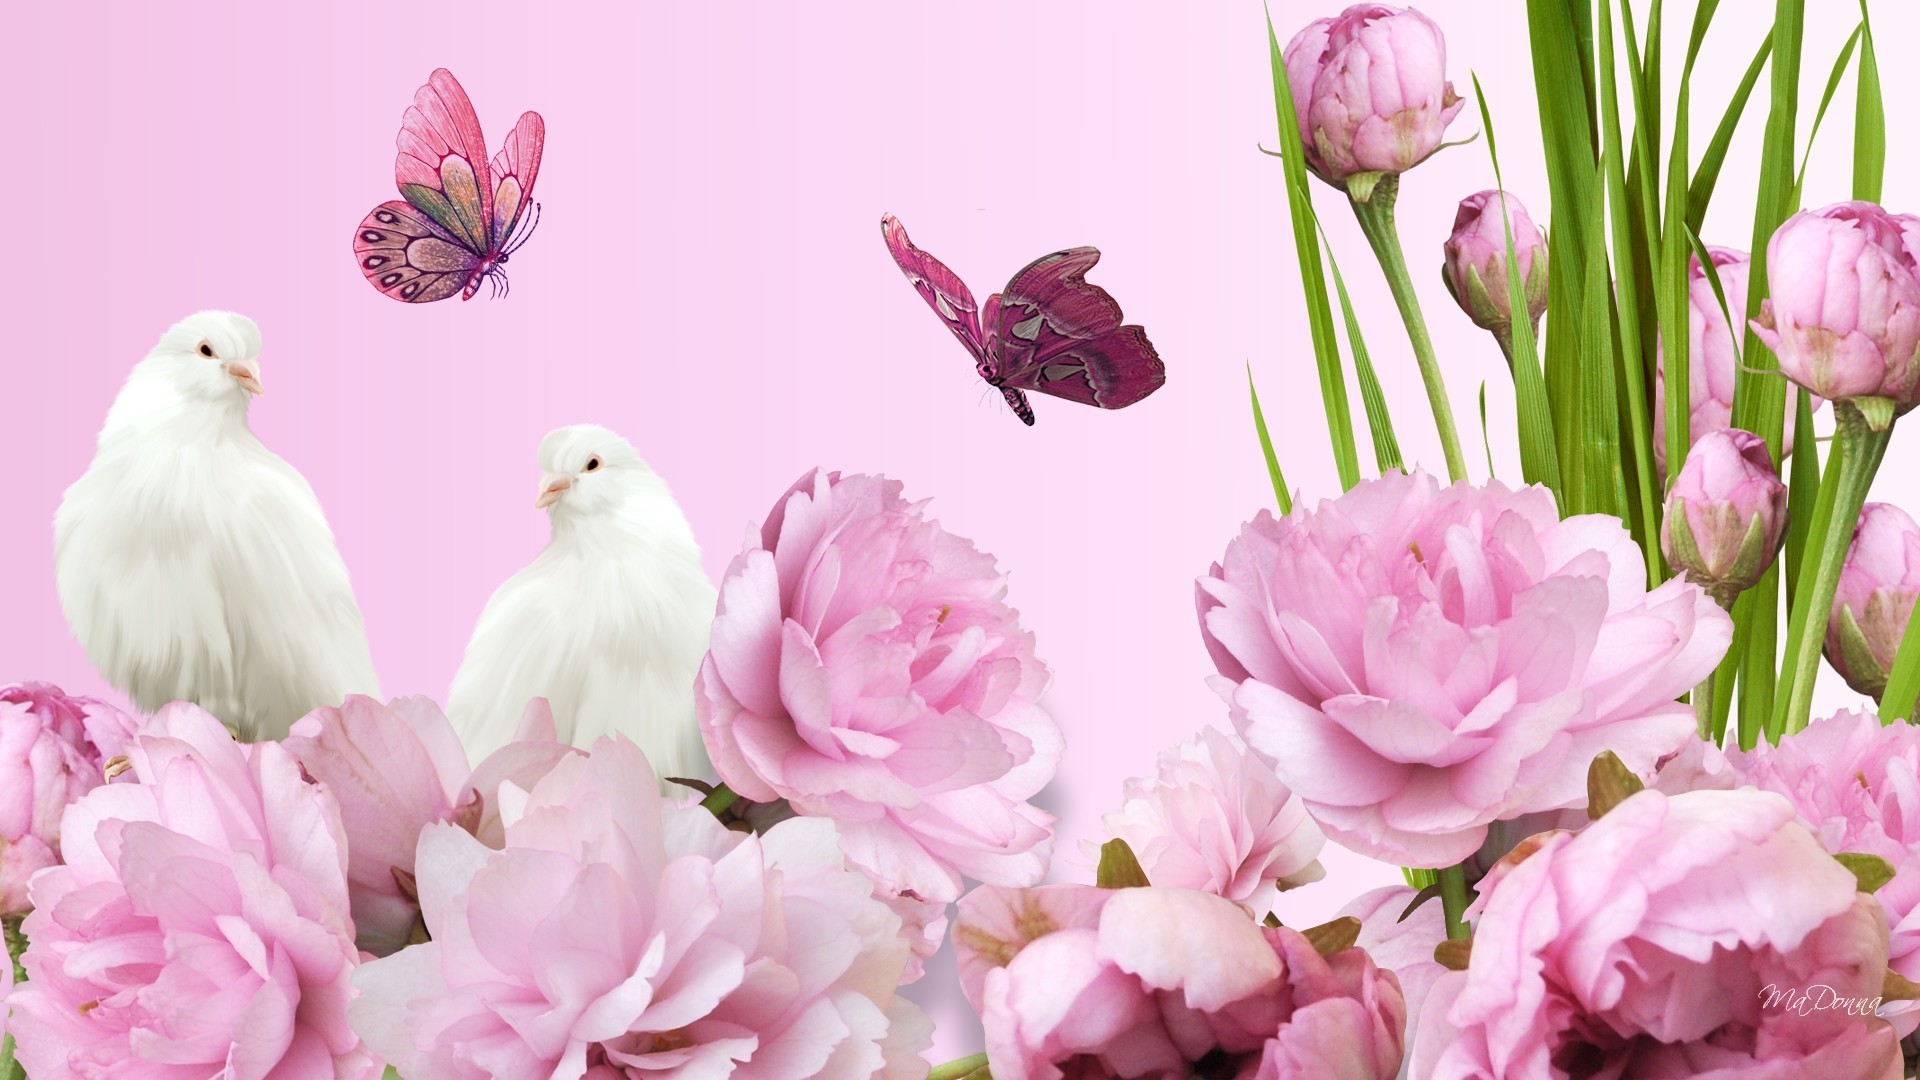 Pink Tag – Peaceful Flowers Doves Bright Spring Peonies Pink Lush Summer Pigeon Fragrant Graceful Aroma